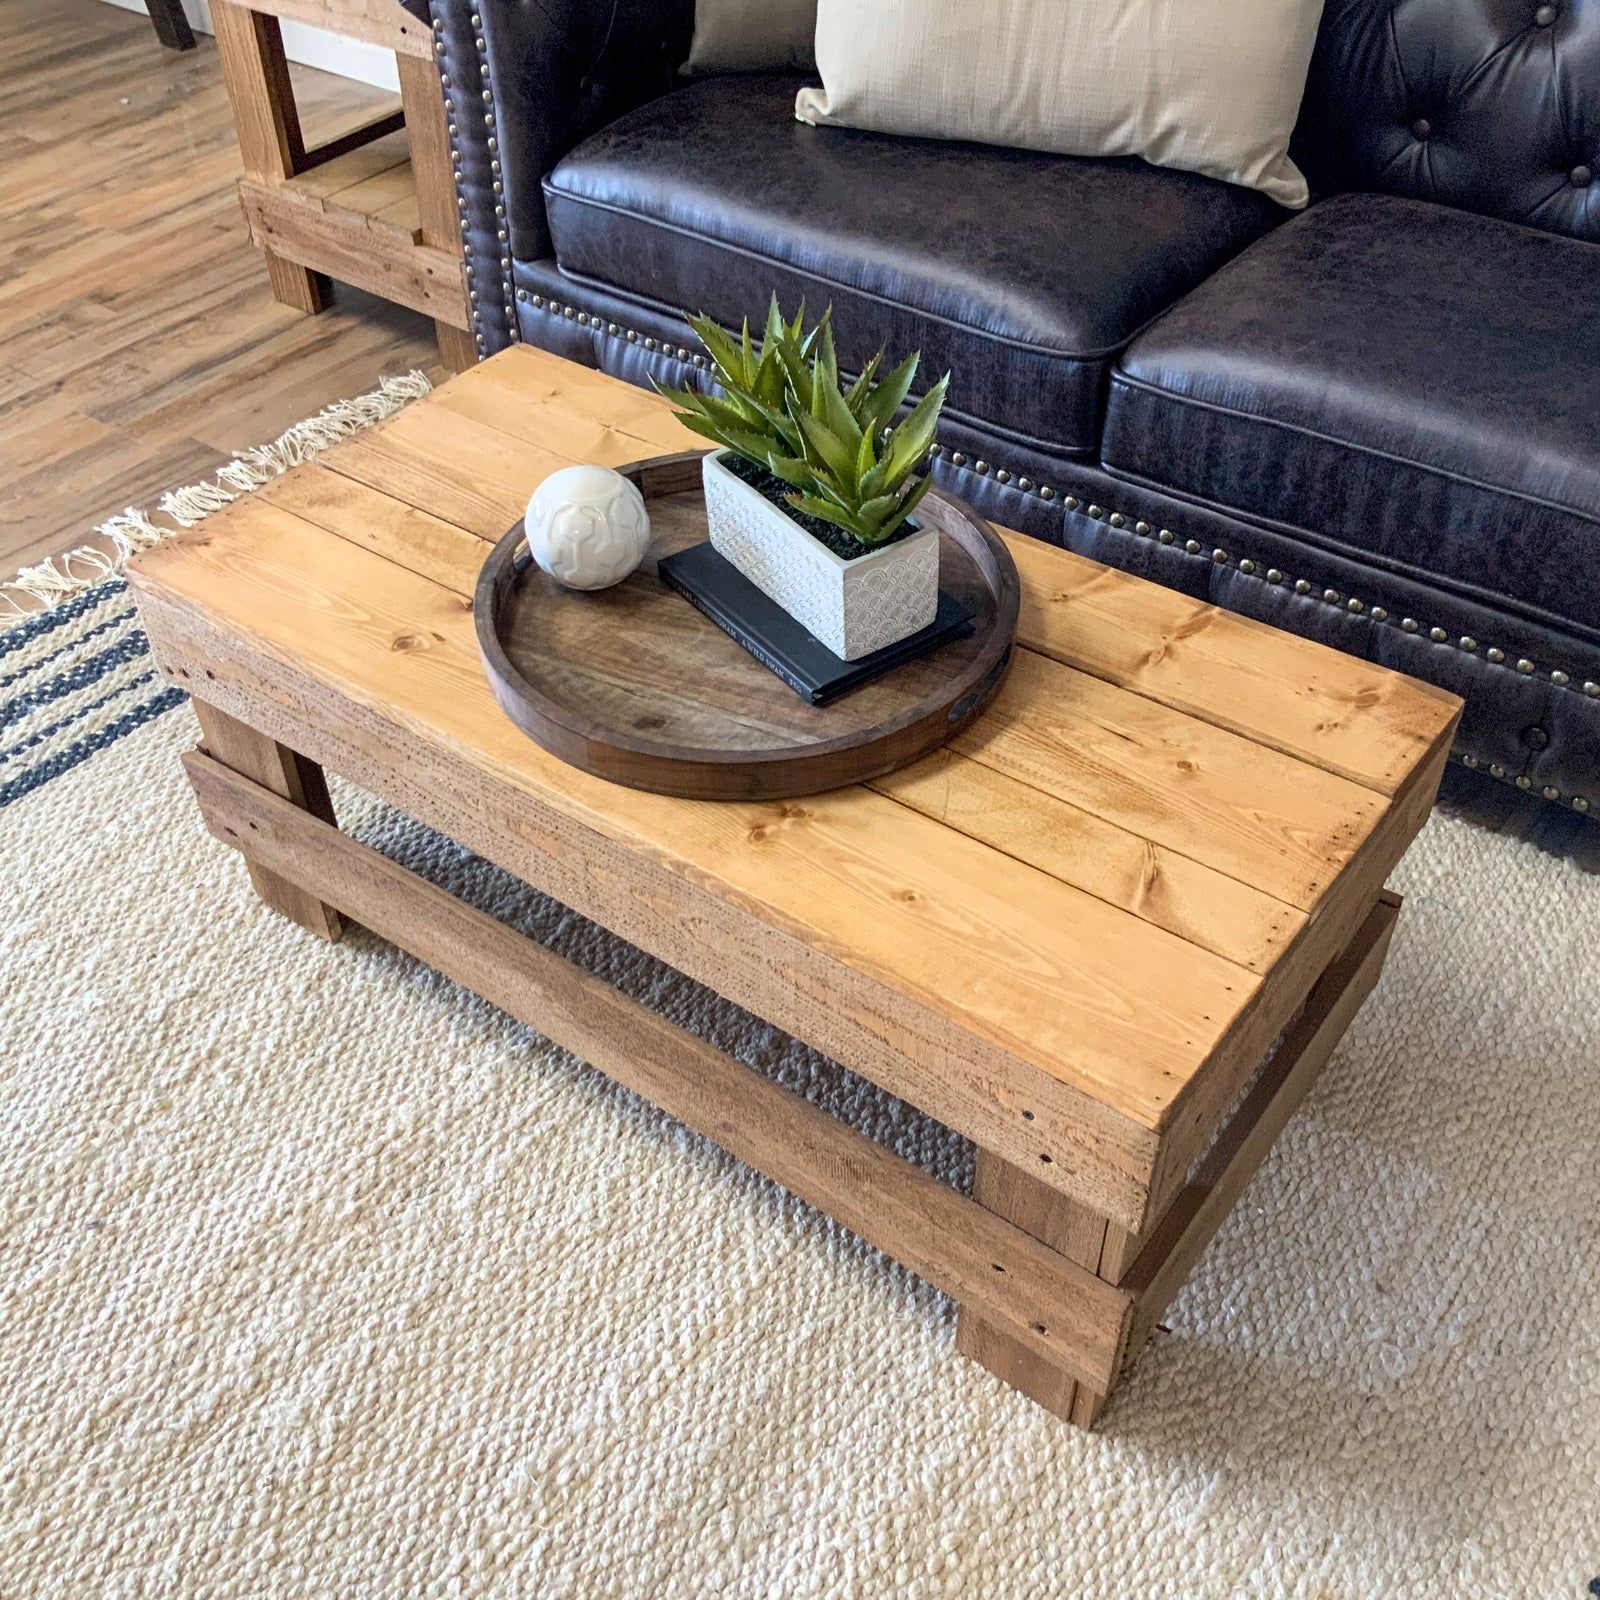 Woven Paths Landmark Pine Solid Wood Farmhouse Coffee Table, Walnut Pertaining To Woven Paths Coffee Tables (Gallery 2 of 20)